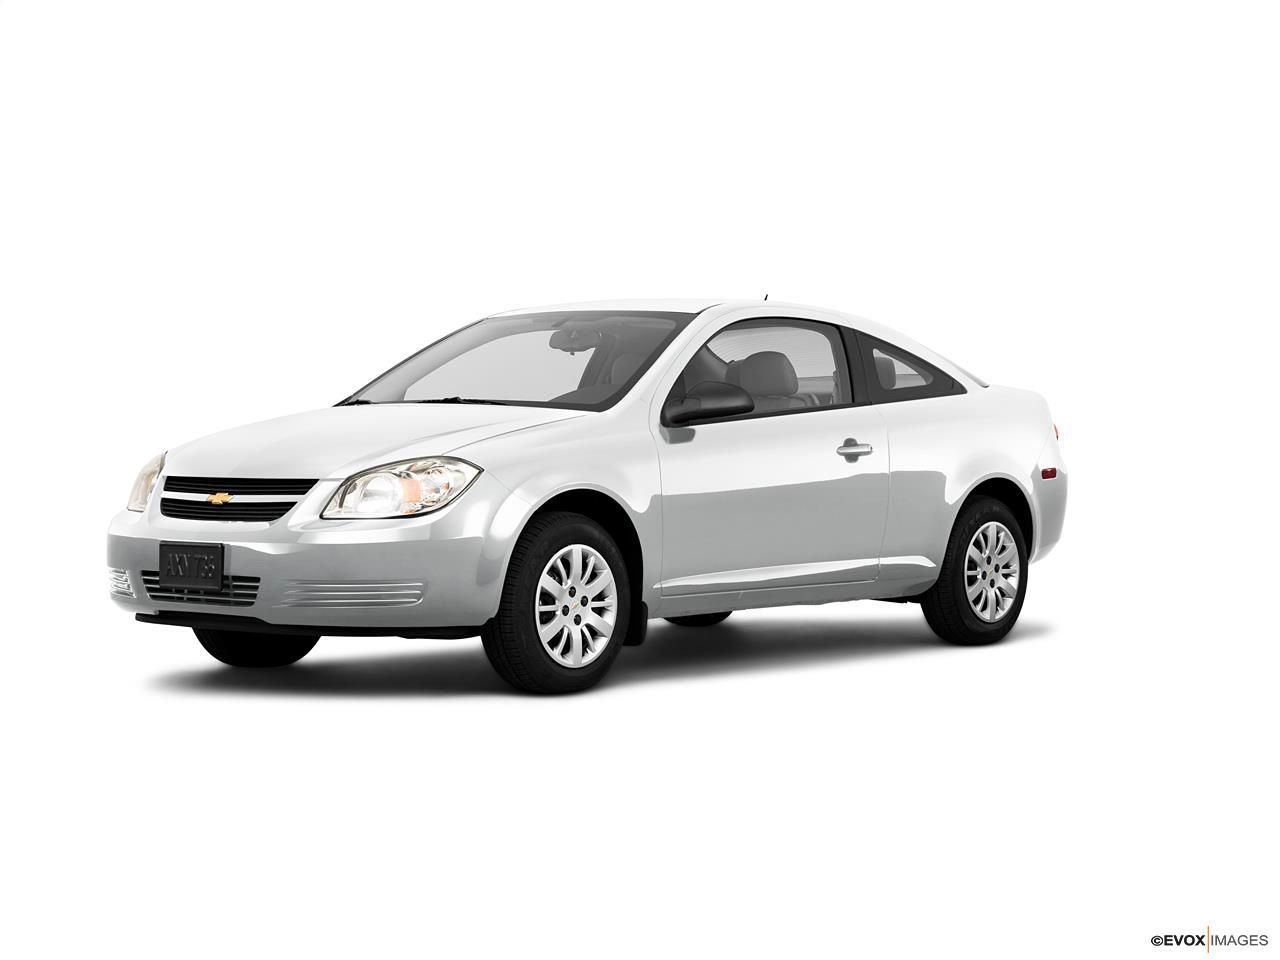 2010 Chevrolet Cobalt Research, Photos, Specs and Expertise | CarMax